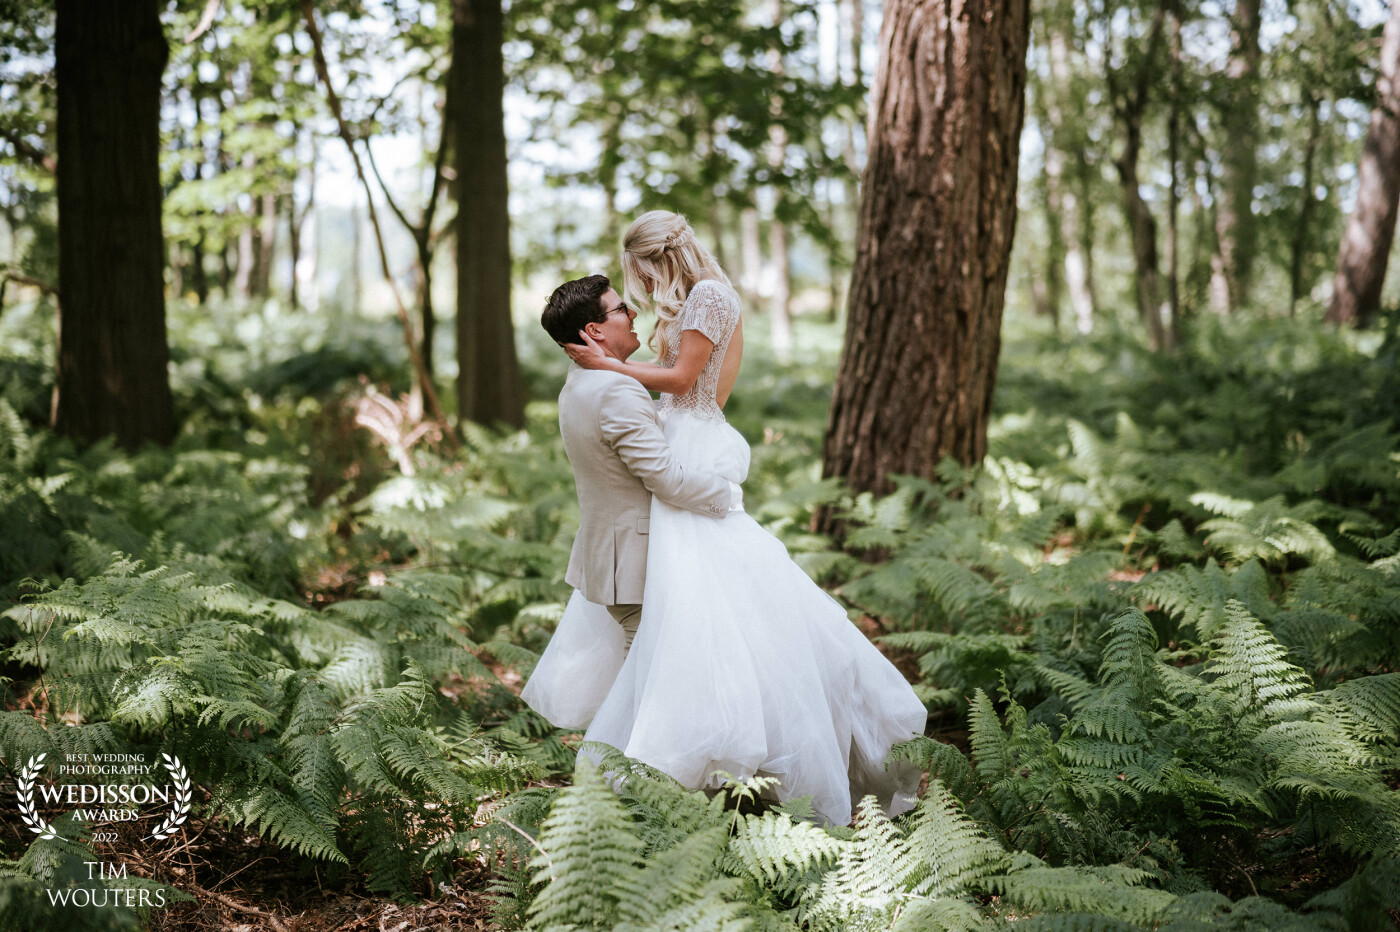 A beautifull wedding day in Tilburg, the netherlands. Last minute the couple wanted to change the Photo shoot location and asked us to come up with one. Some quick googleing on our part found us this forest covered with ferns , we knew right away it would be the perfect location!